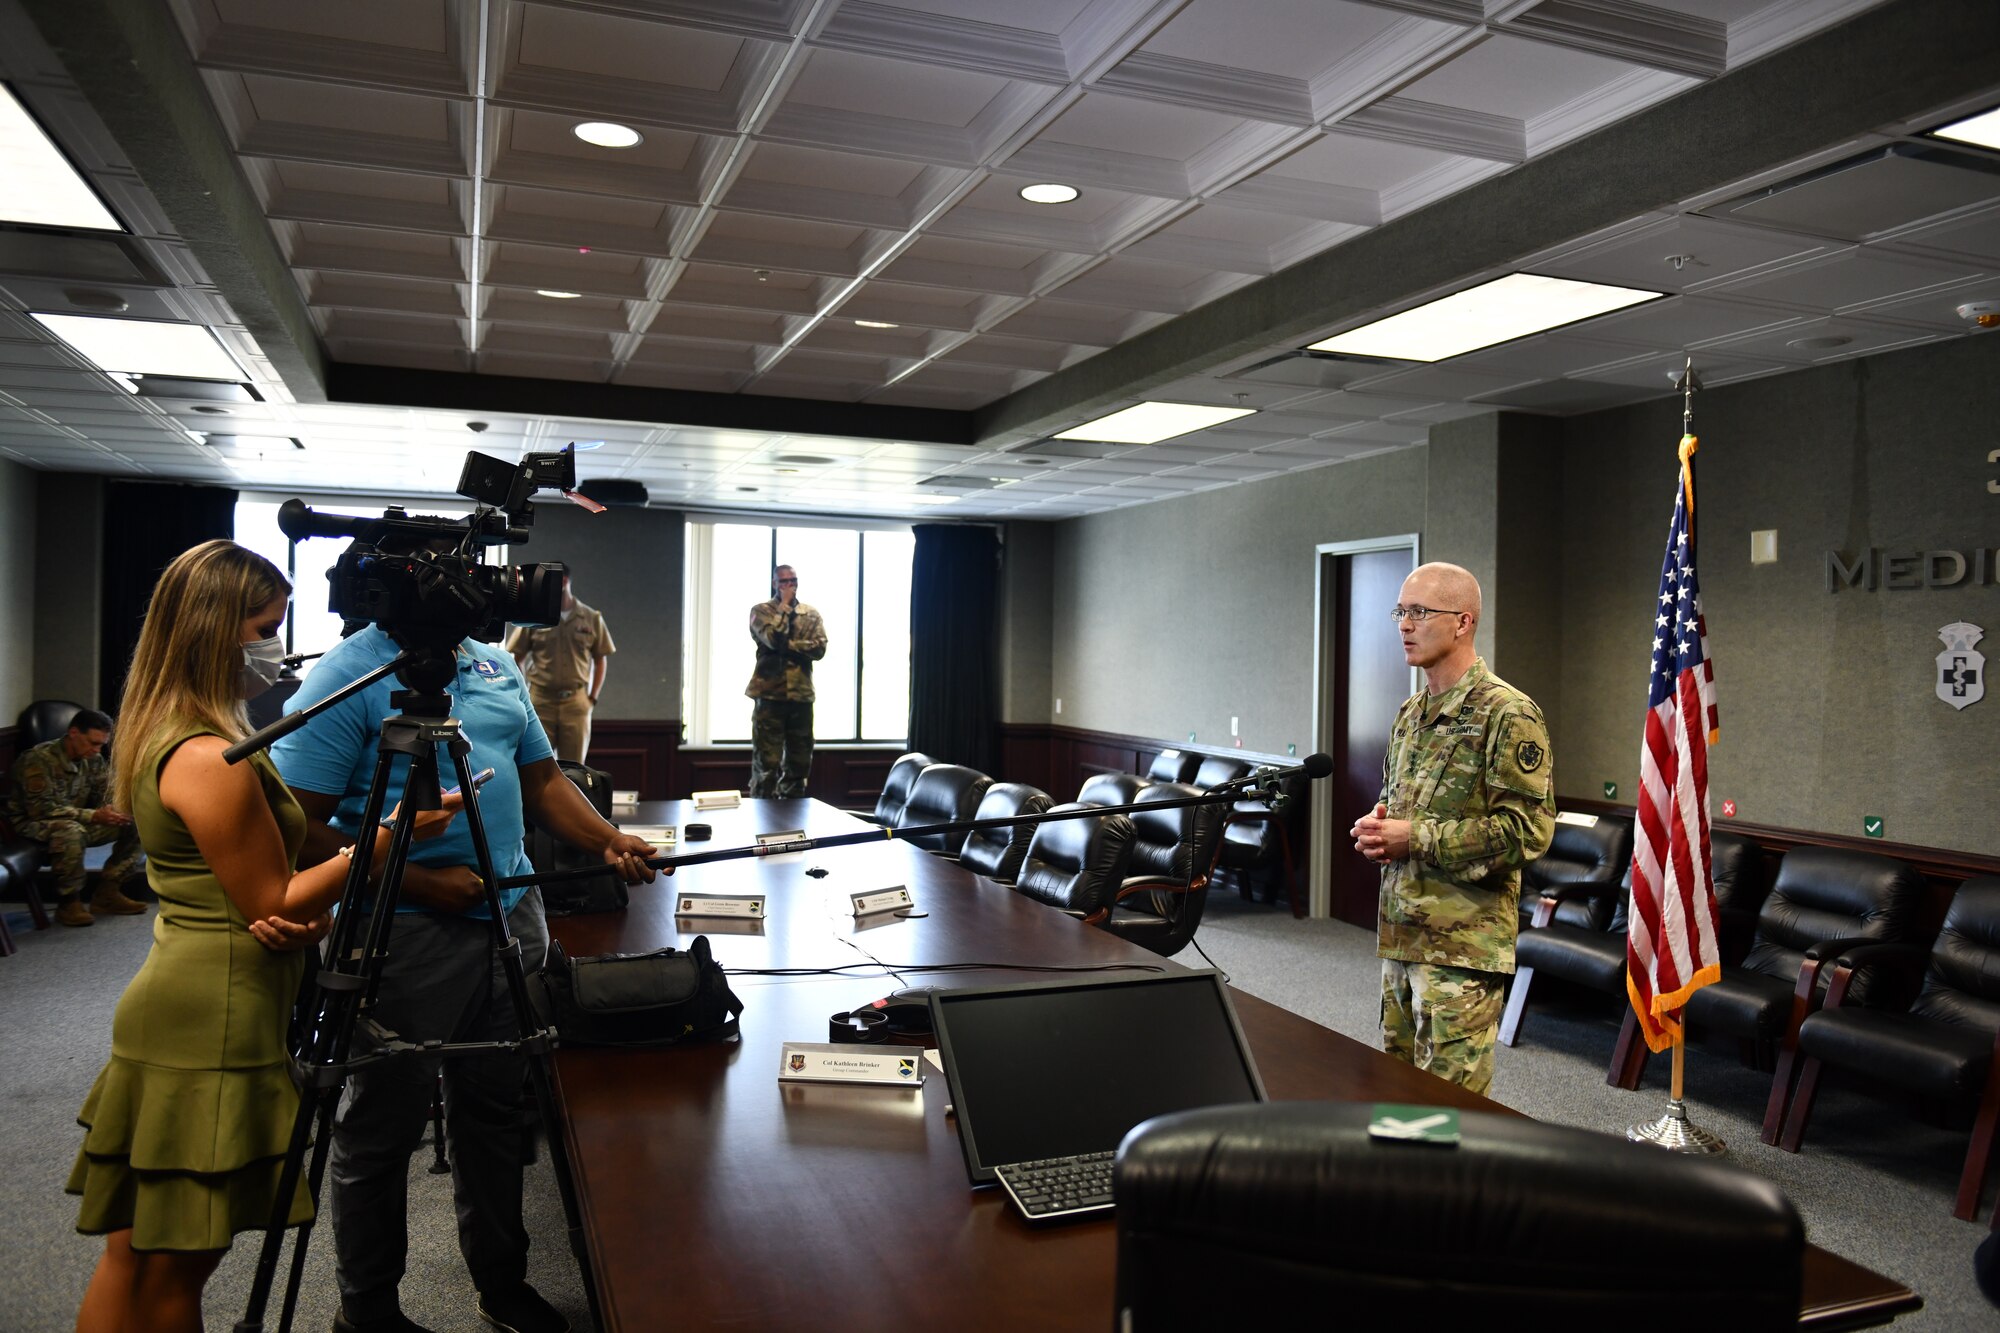 U.S. Army Lt. Gen. Ronald J. Place (middle), Defense Health Agency director, answers questions from local news stations at Tyndall Air Force Base, Florida, Aug. 31, 2020. Place toured Tyndall and spoke with local media regarding future changes to DHA programs and policies (U.S. Air Force photo by Senior Airman Stefan Alvarez)